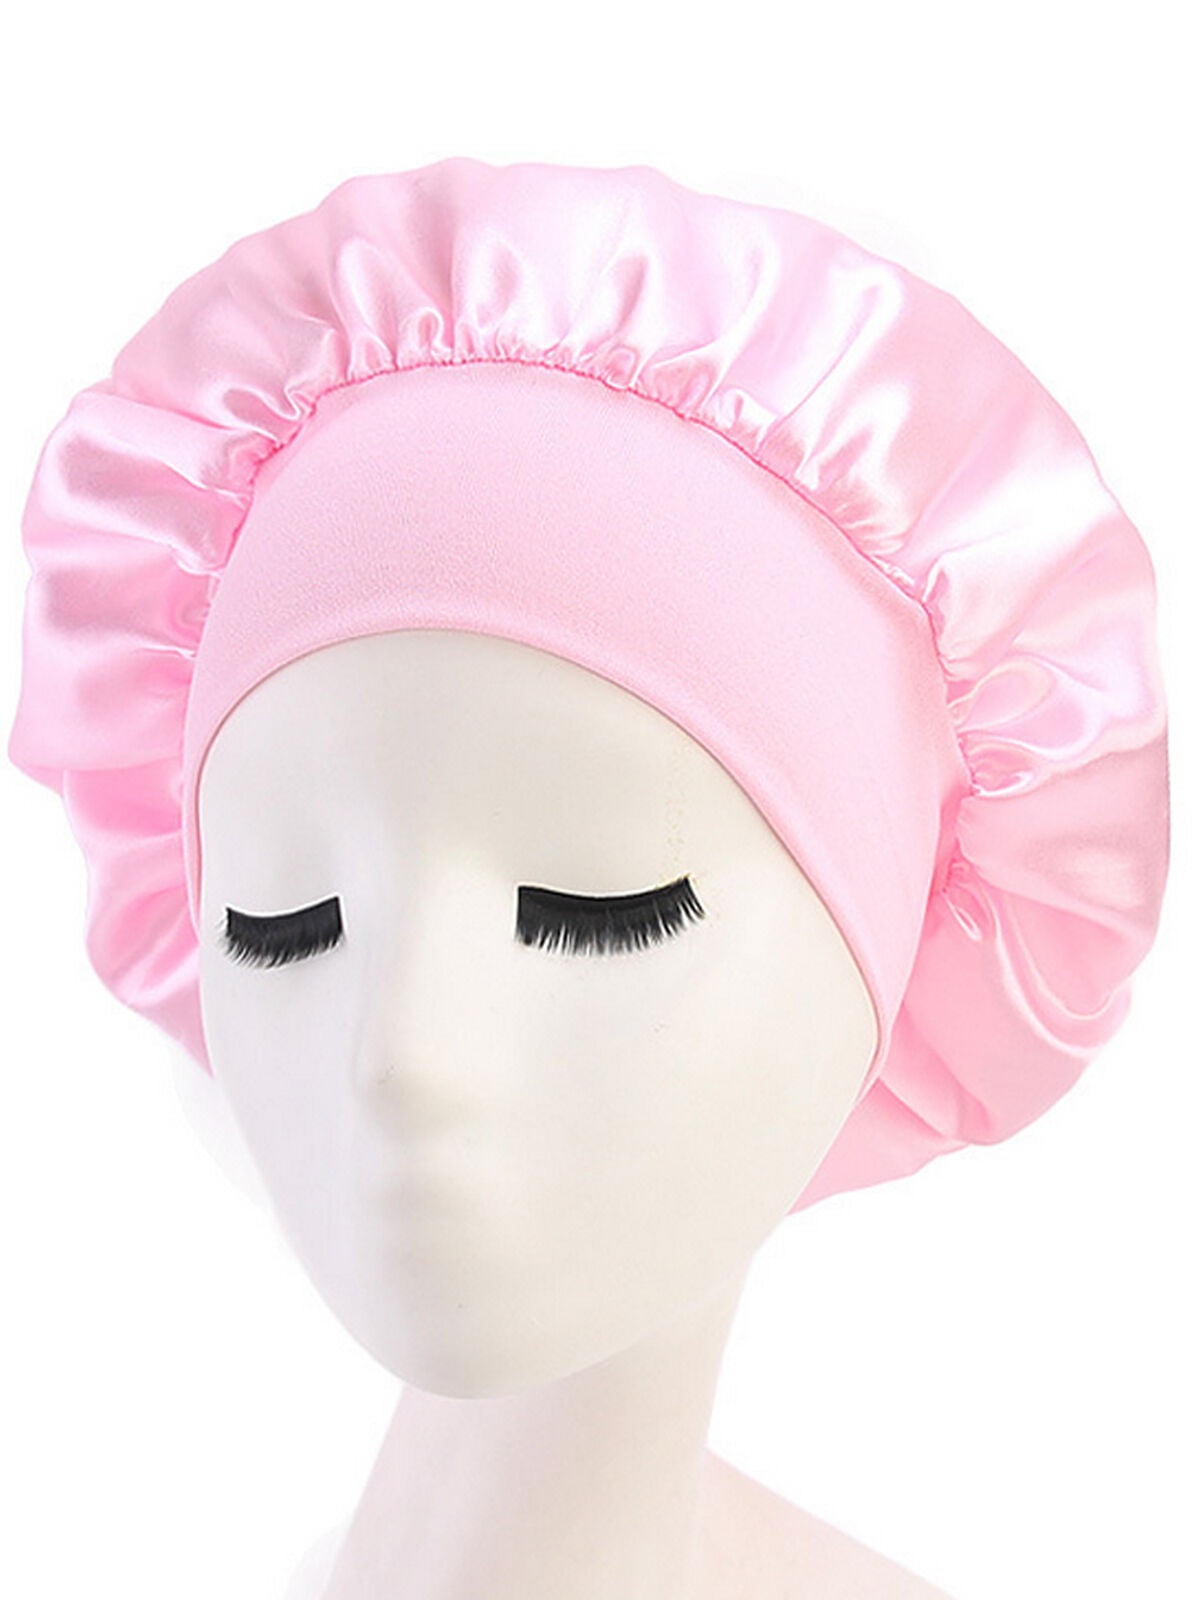 Details about   Kids Satin Night Sleep Cap Hair Care Bonnet Hat Head Cover Wide Band Adjust Caps